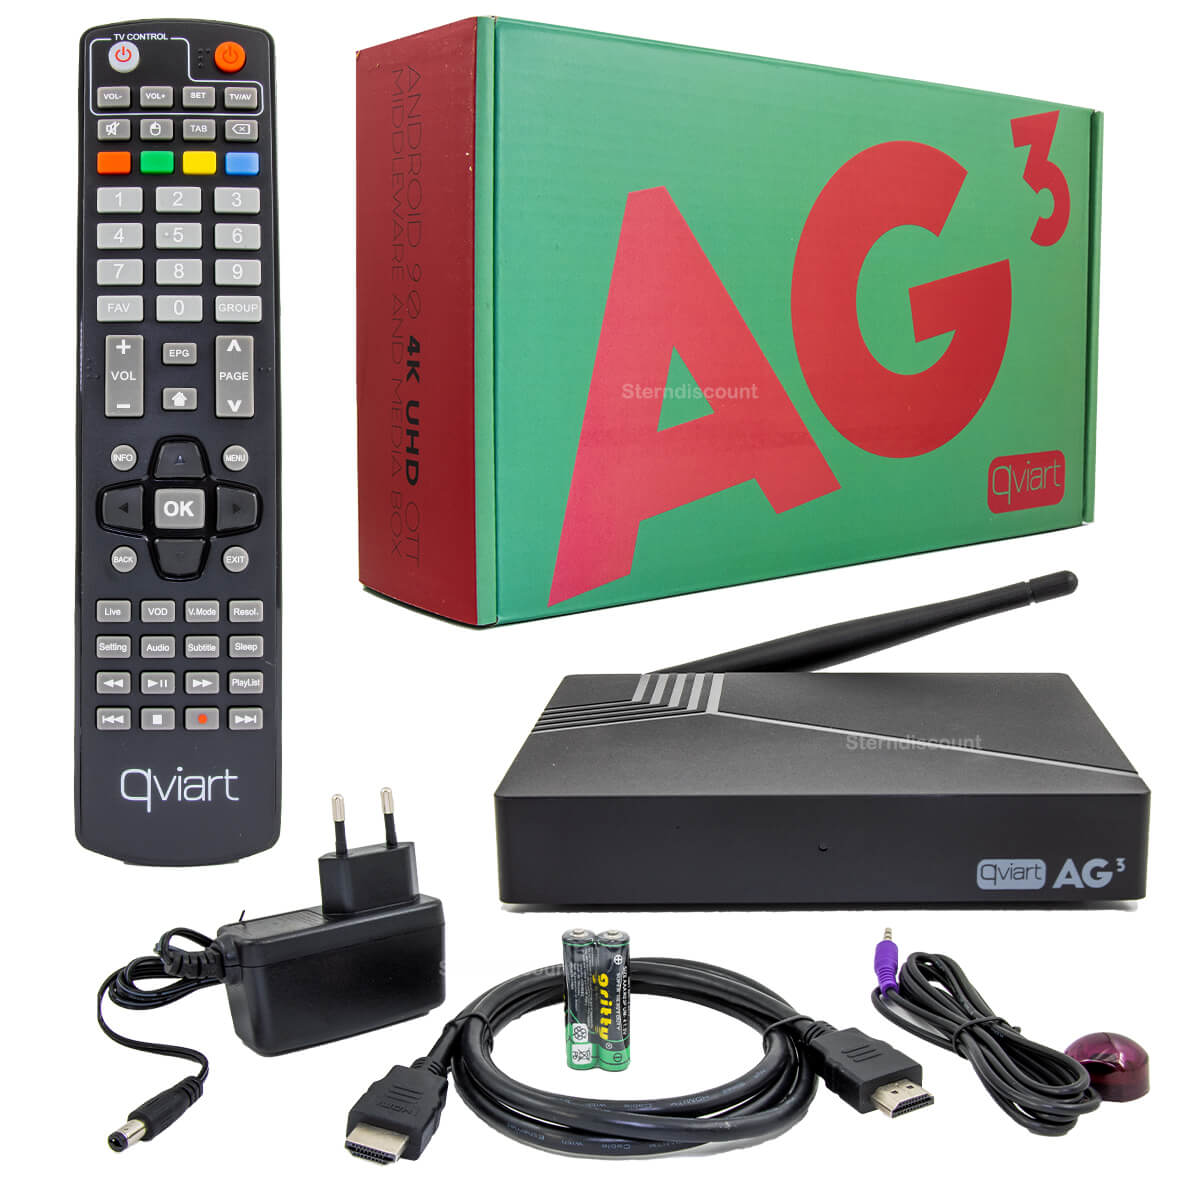 Qviart-AG3-Android-TV-IPTV-Box